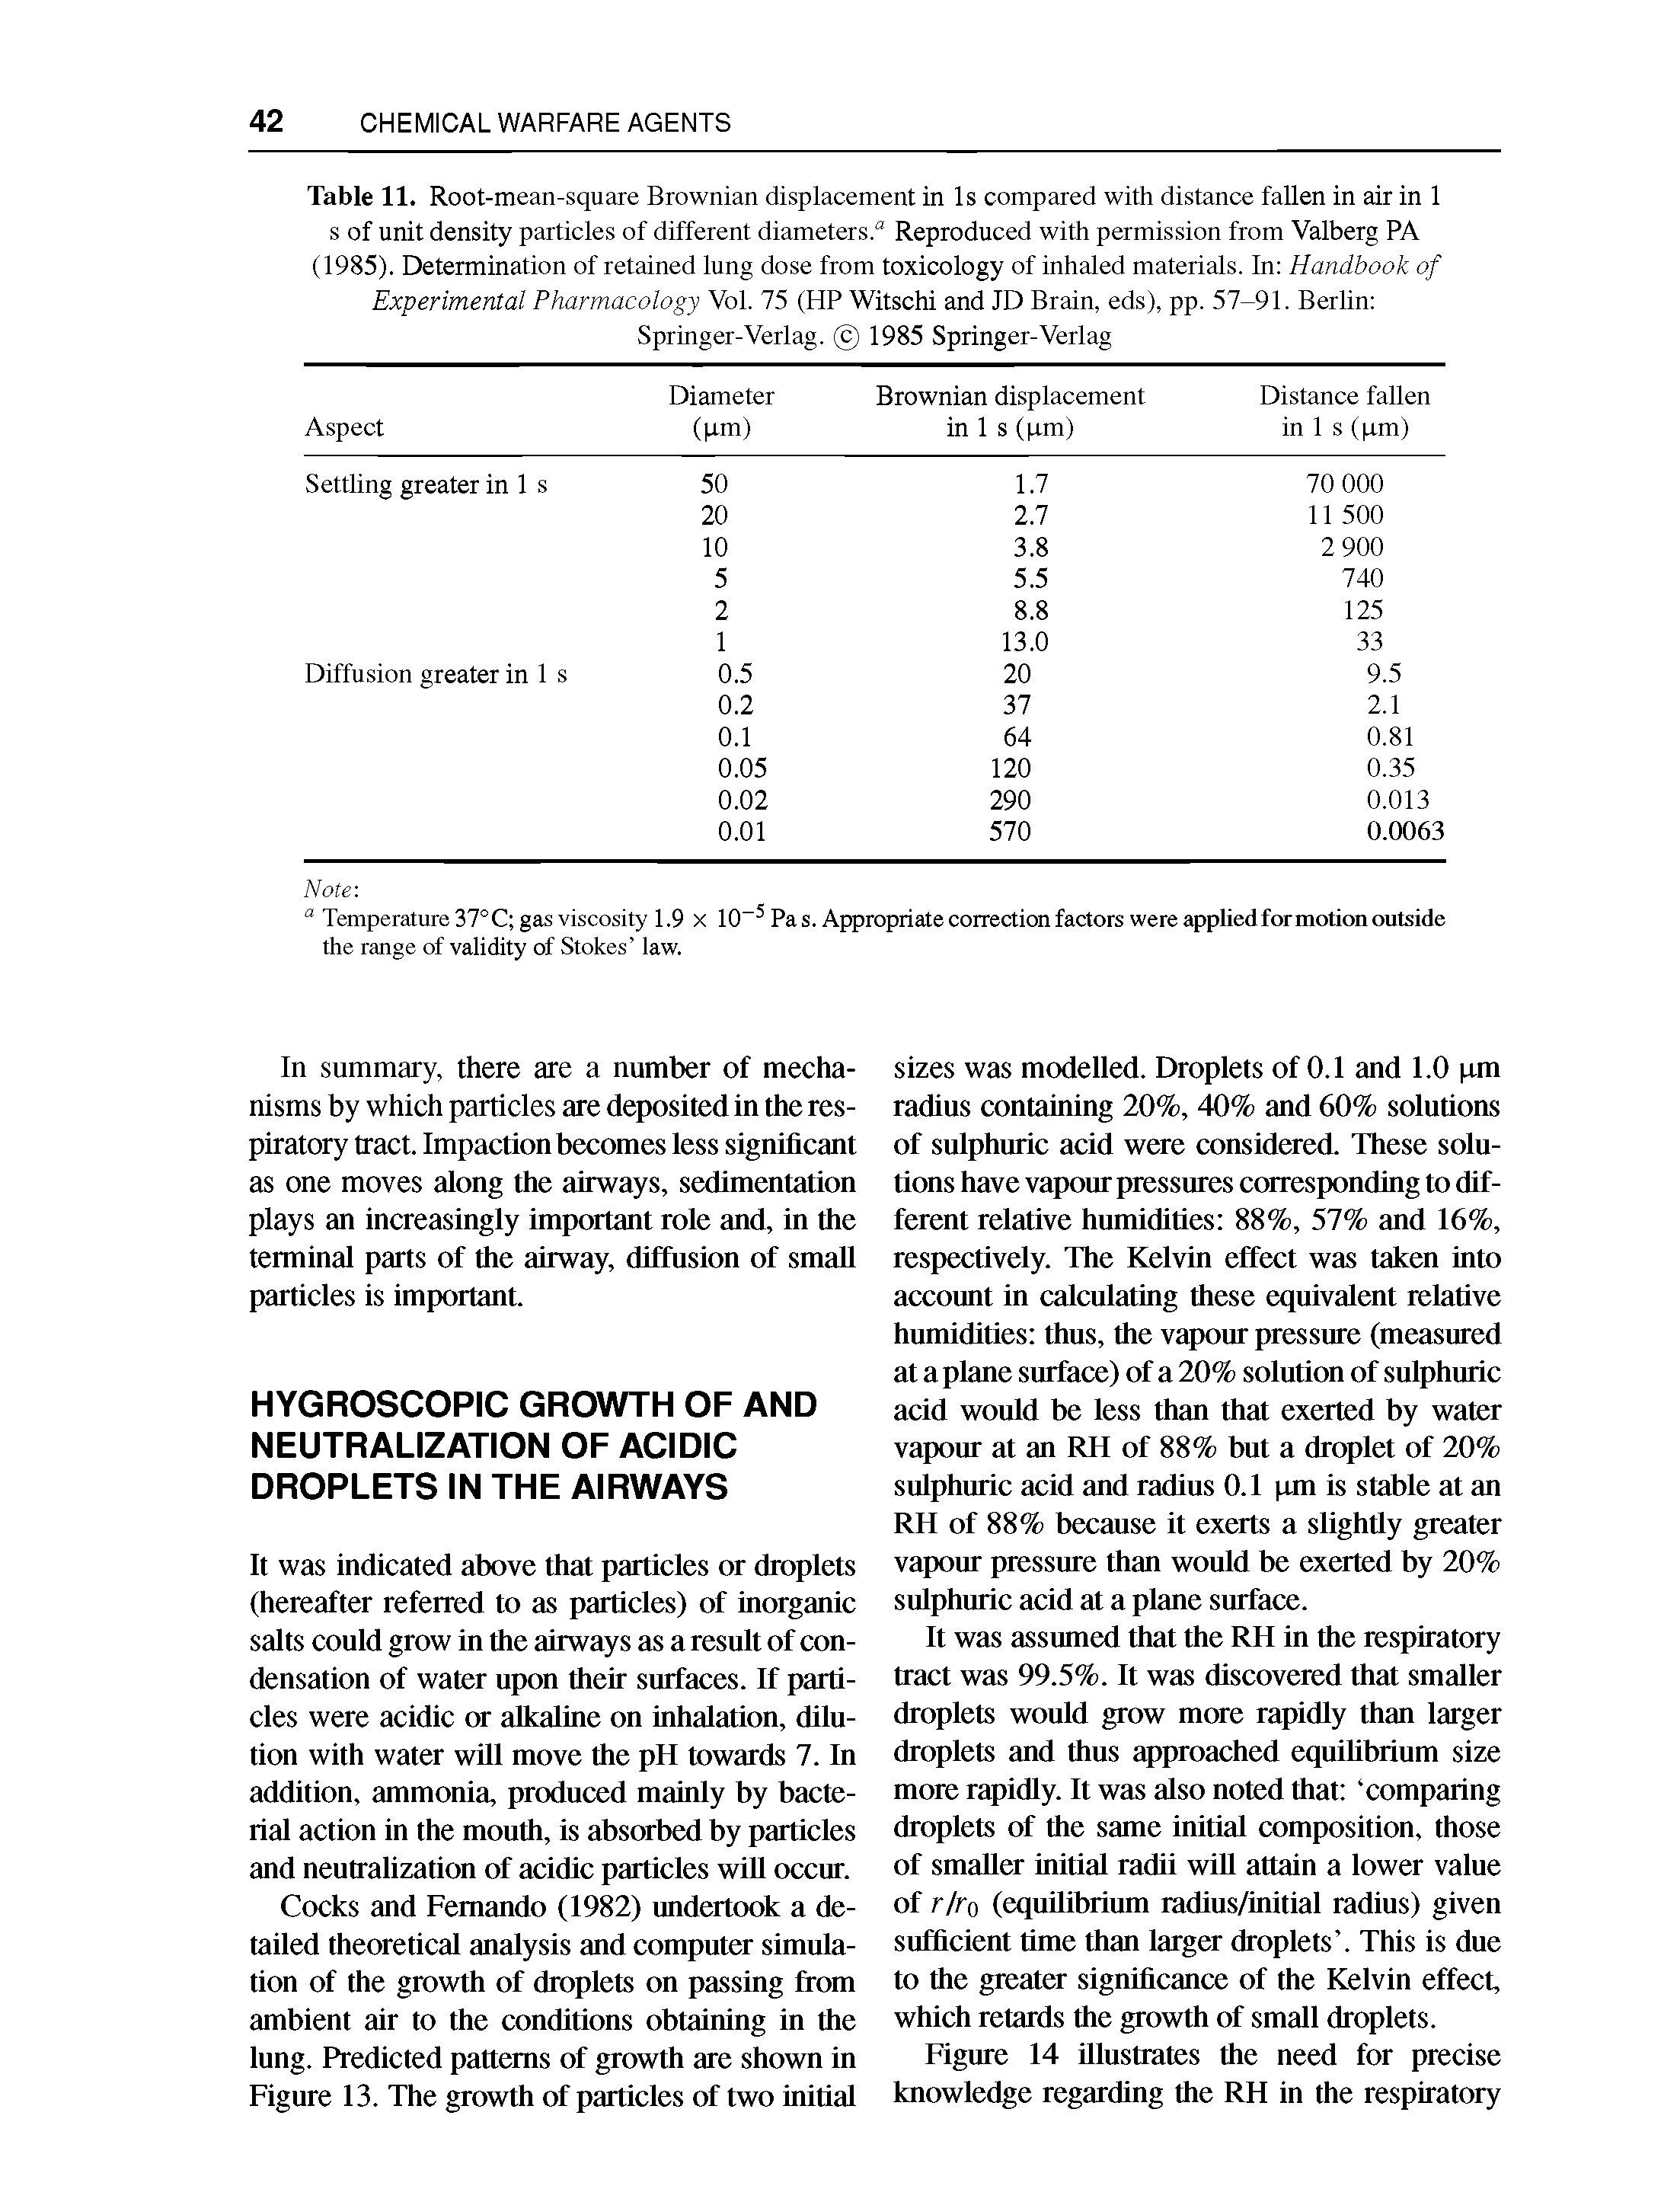 Table 11. Root-mean-square Brownian displacement in Is compared with distance fallen in air in 1 s of unit density particles of different diameters.11 Reproduced with permission from Valberg PA (1985). Determination of retained lung dose from toxicology of inhaled materials. In Handbook of Experimental Pharmacology Vol. 75 (HP Witschi and JD Brain, eds), pp. 57-91. Berlin Springer-Verlag. 1985 Springer-Verlag...